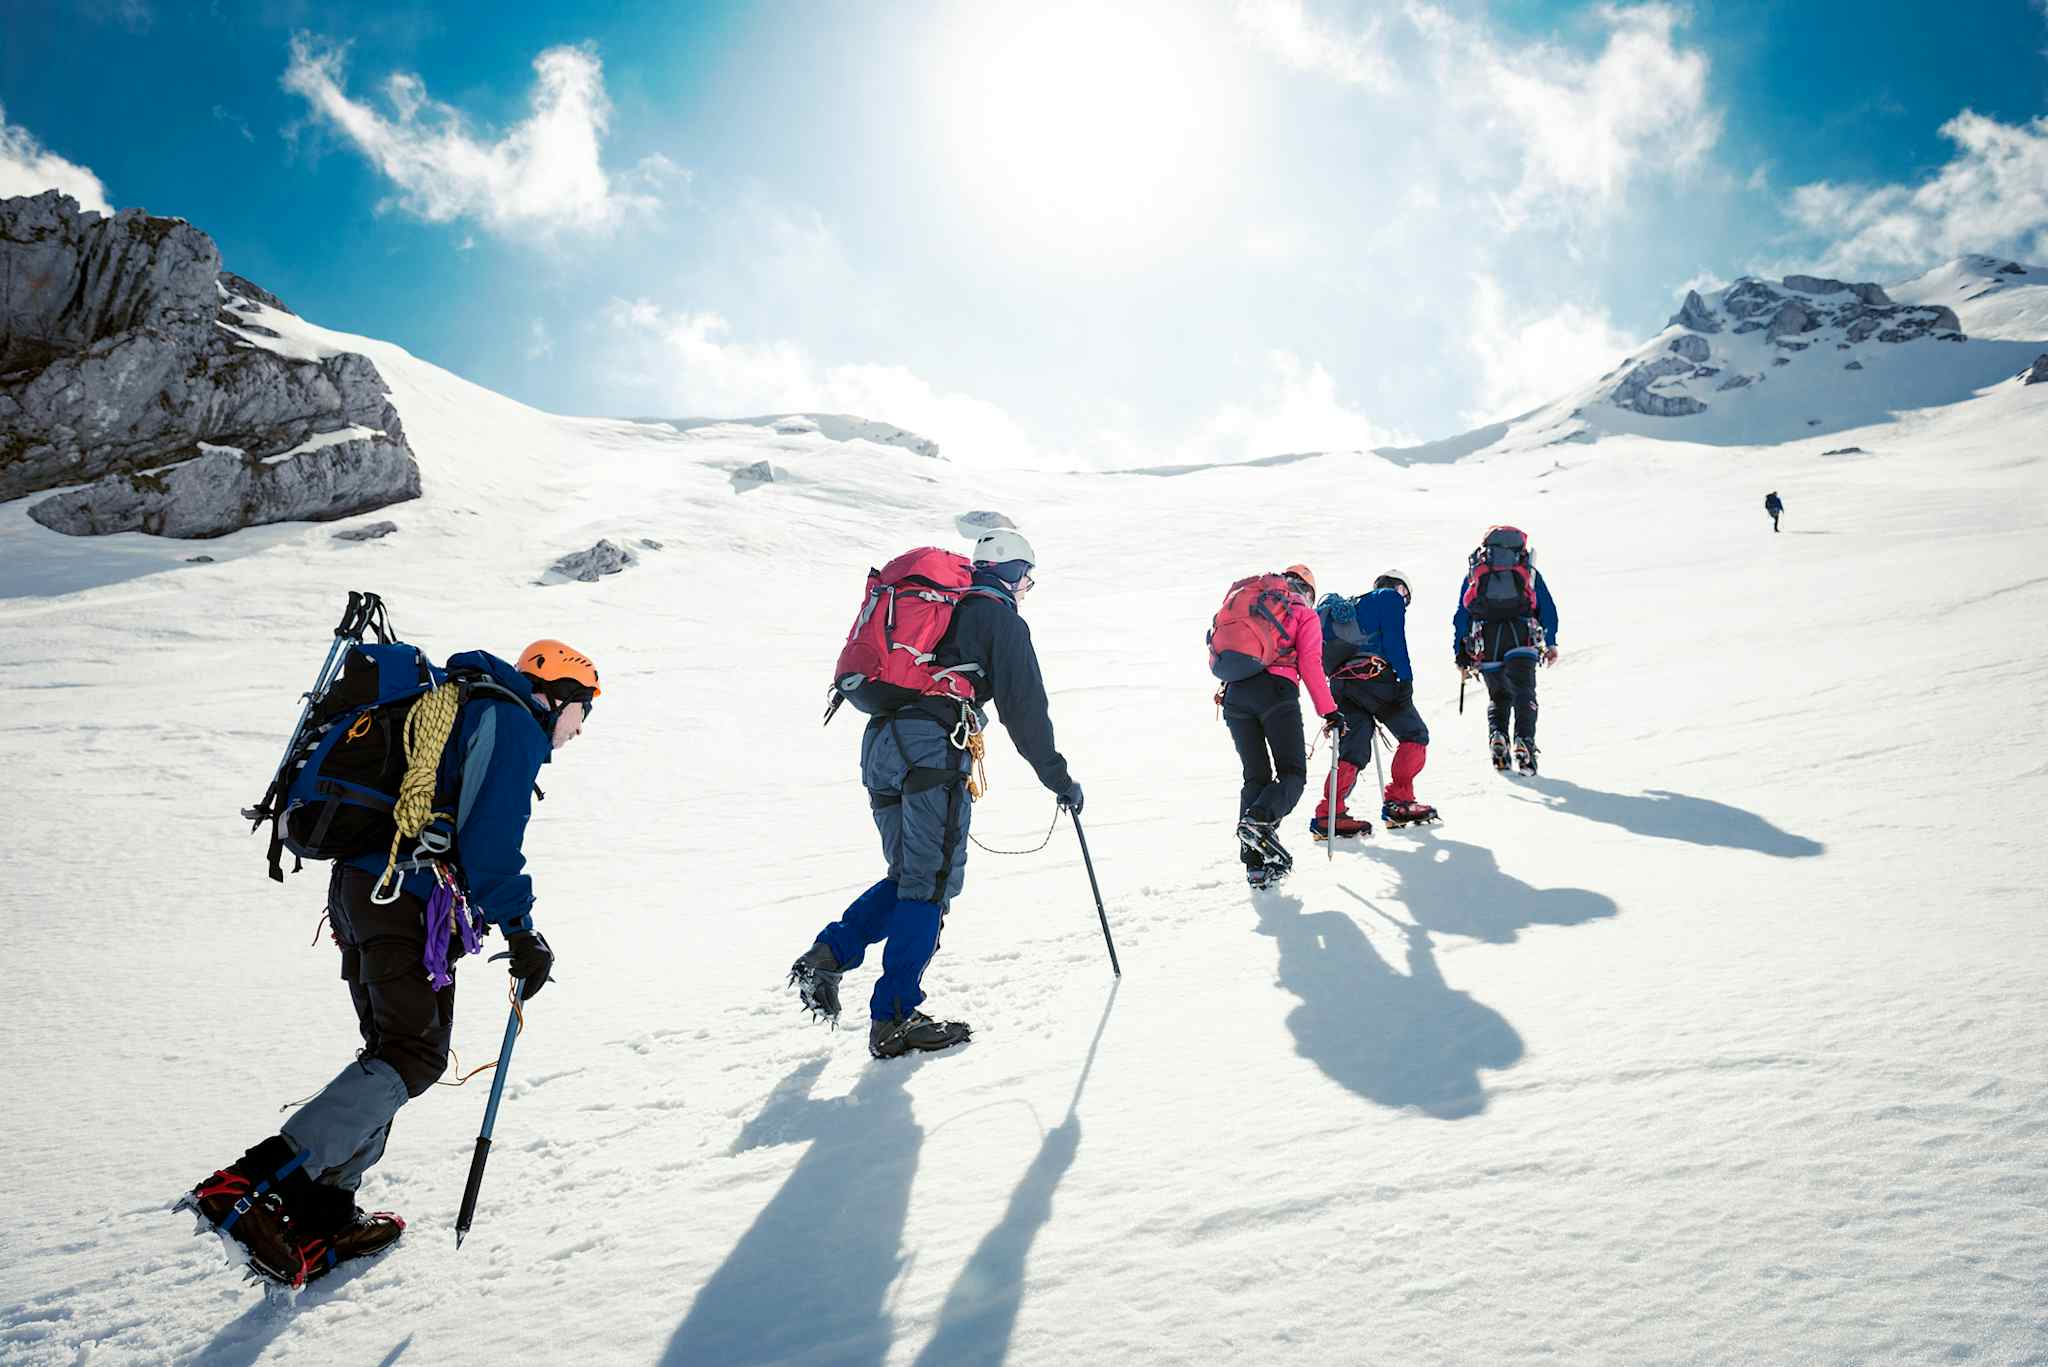 Mountaineering in snow. Photo: GettyImages-472236595